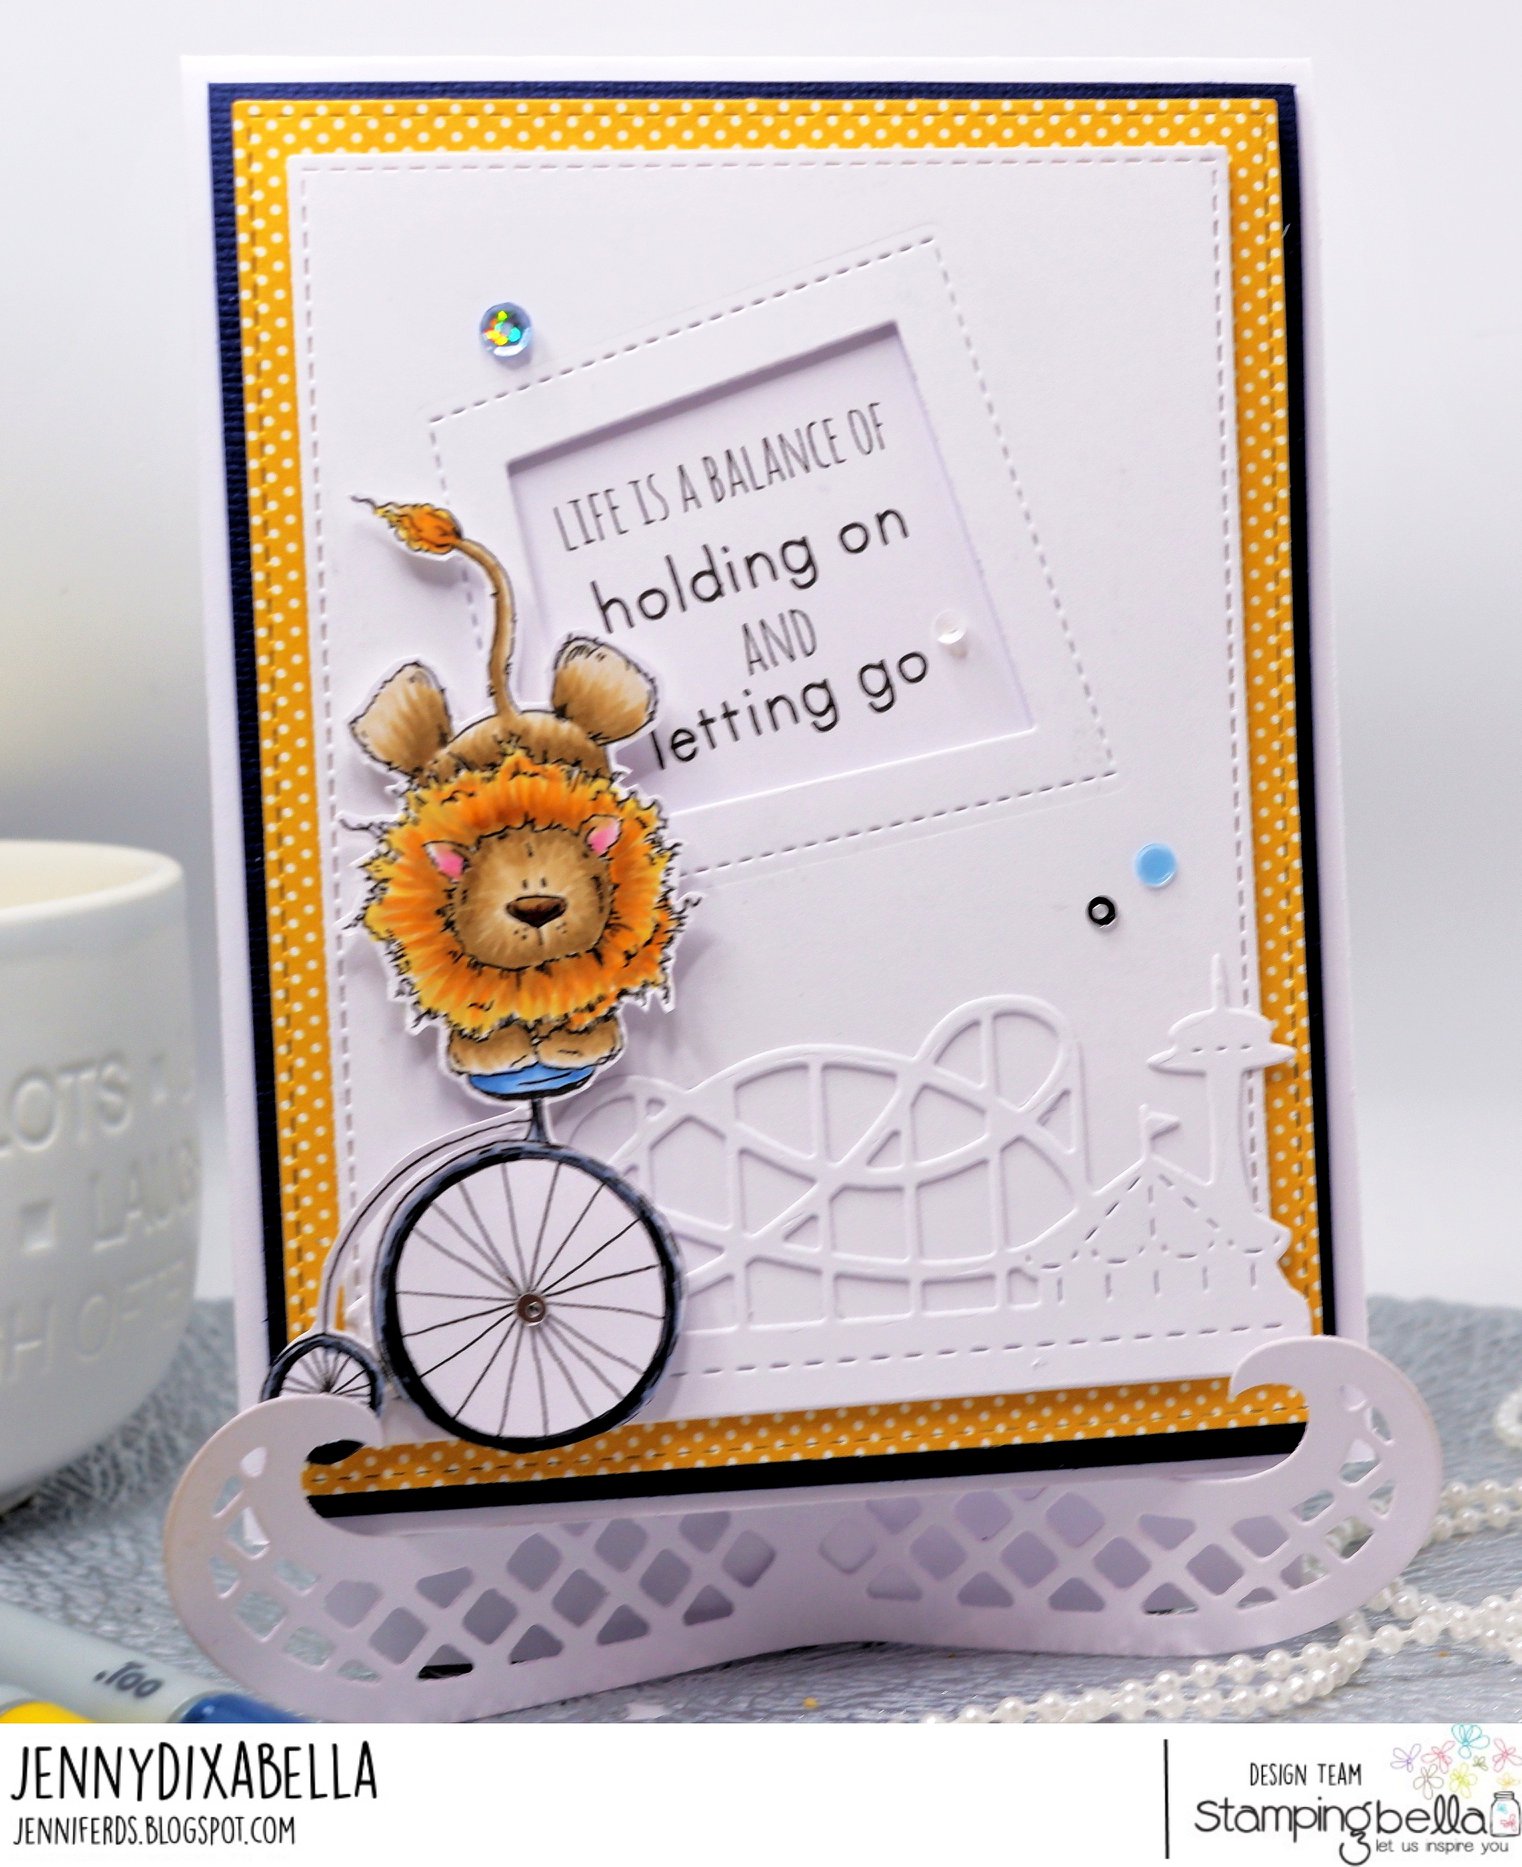 www.stampingbella.com: Rubber stamp used: LEO THE BALANCING LION. Card by Jenny Dix